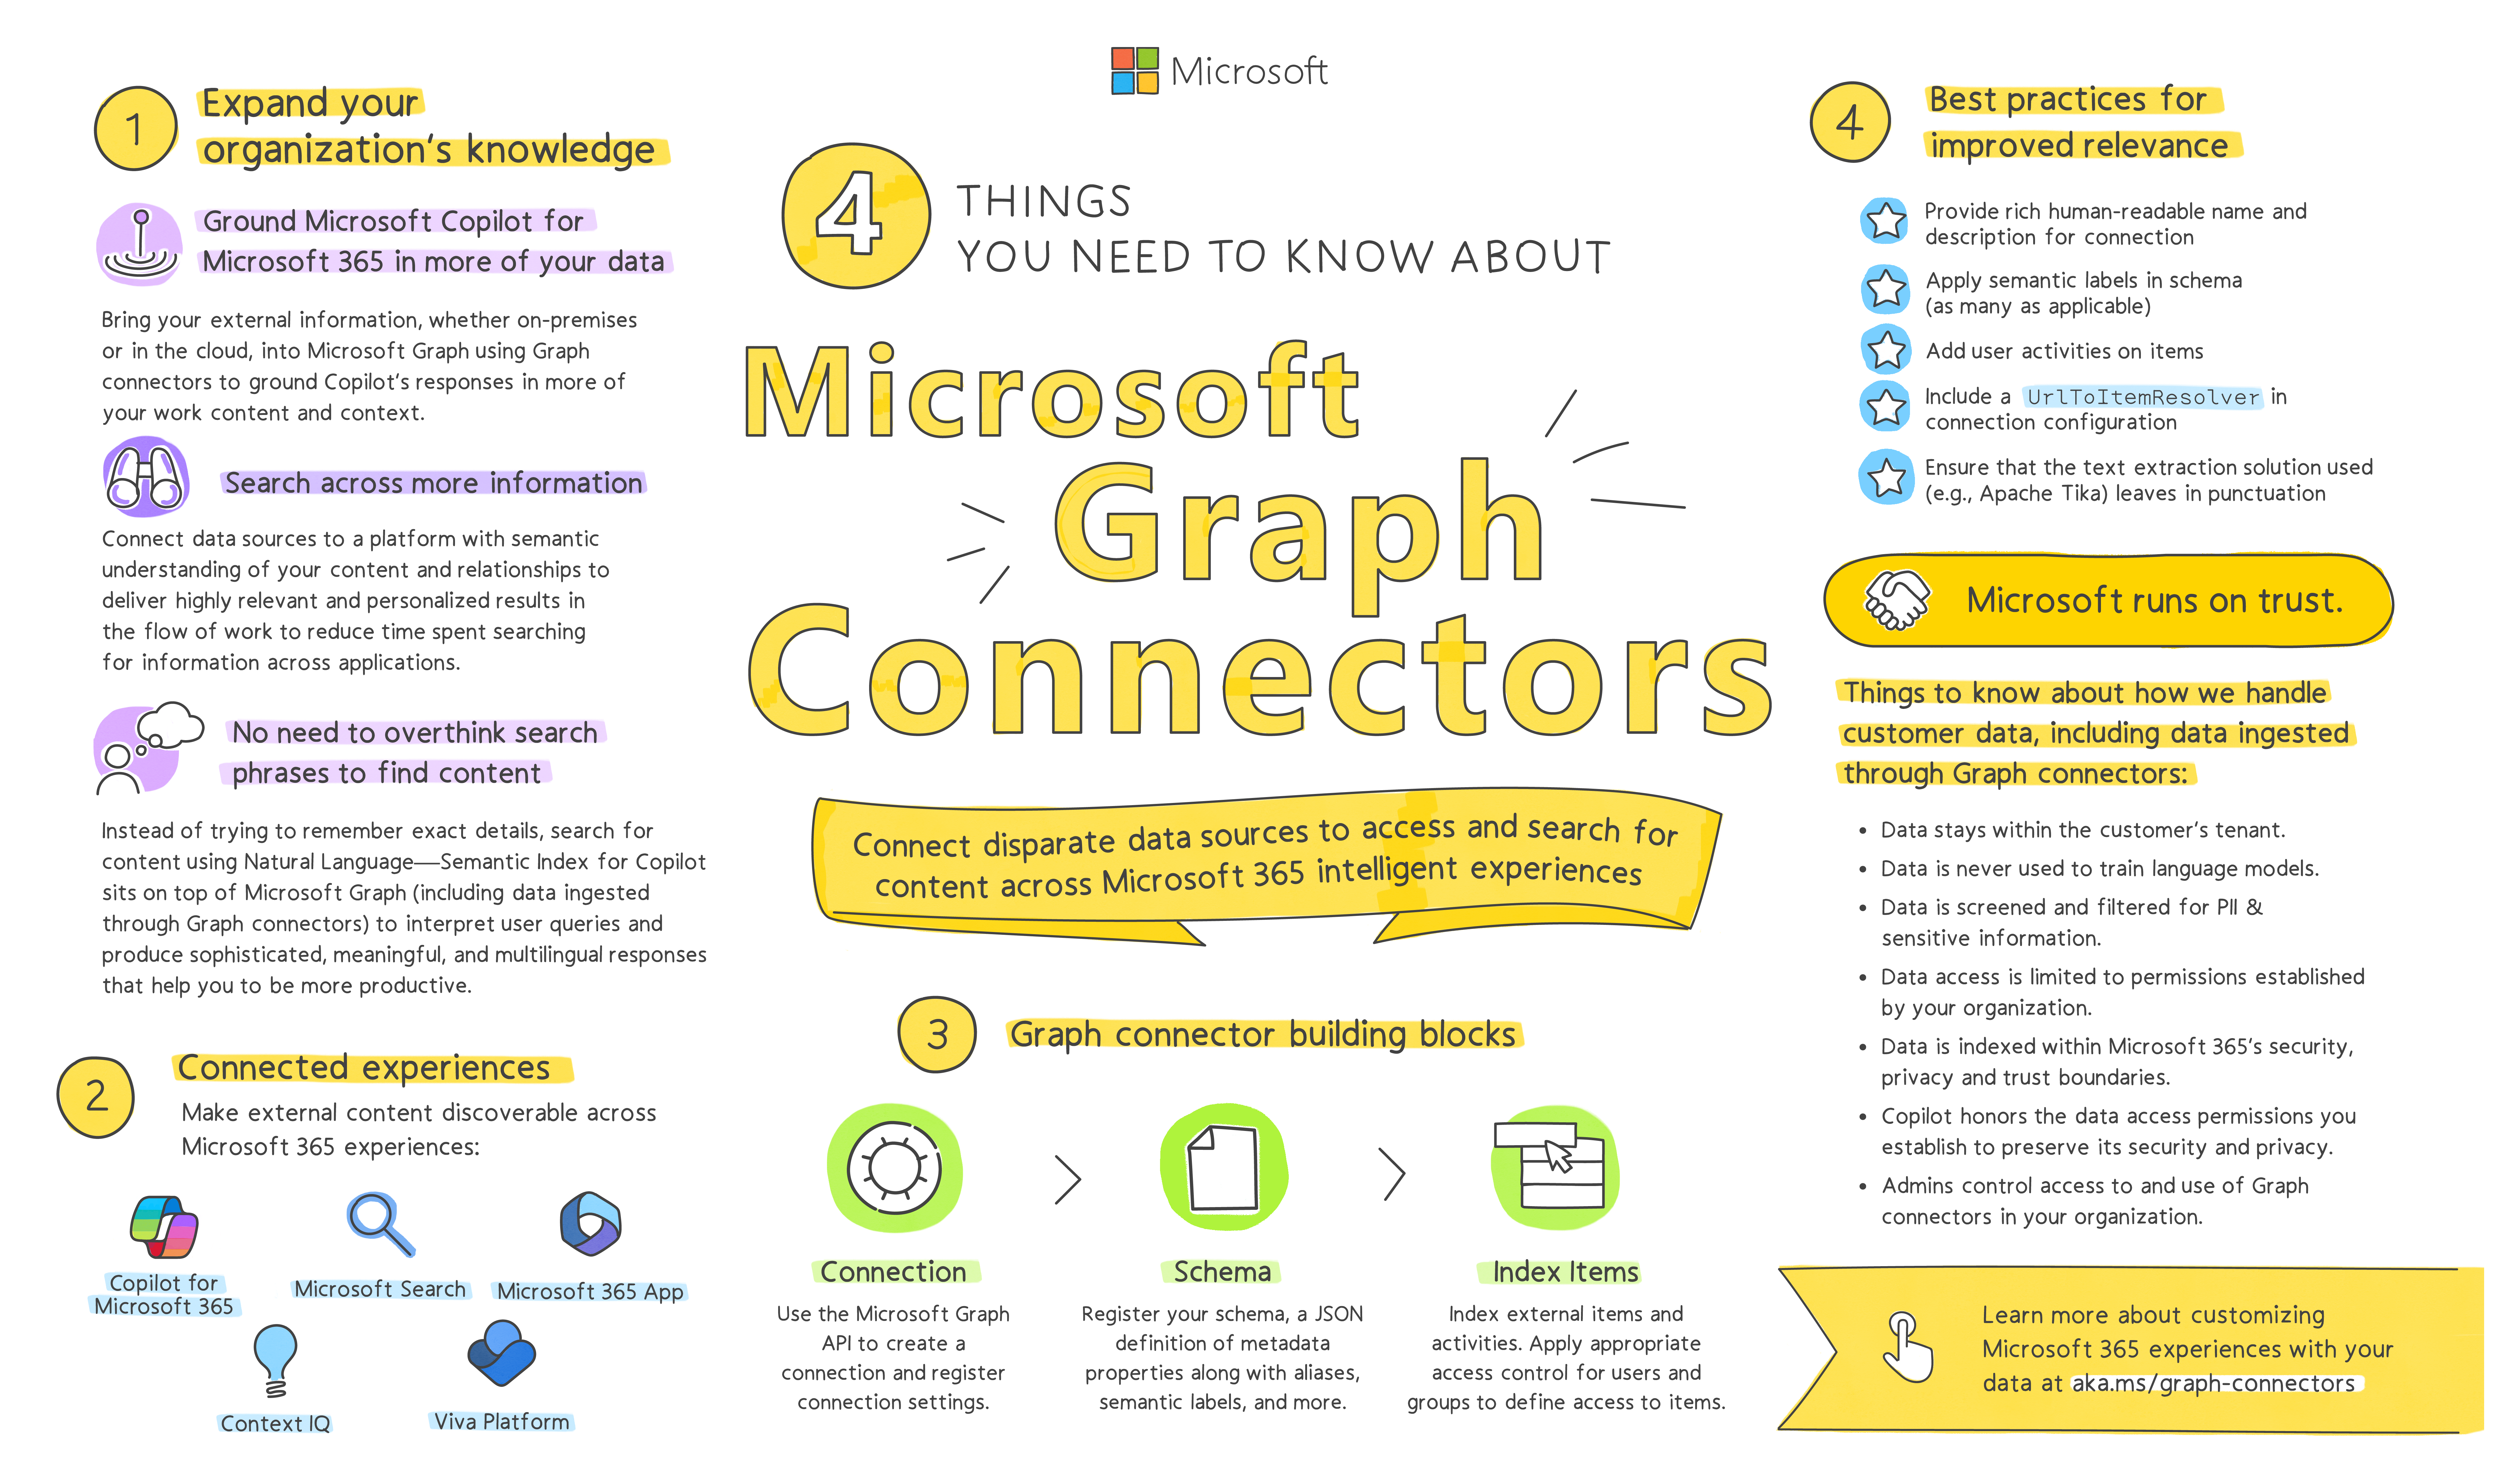 This infographic summarizes how Microsoft Graph connectors make your data available to Microsoft 365 intelligent experiences